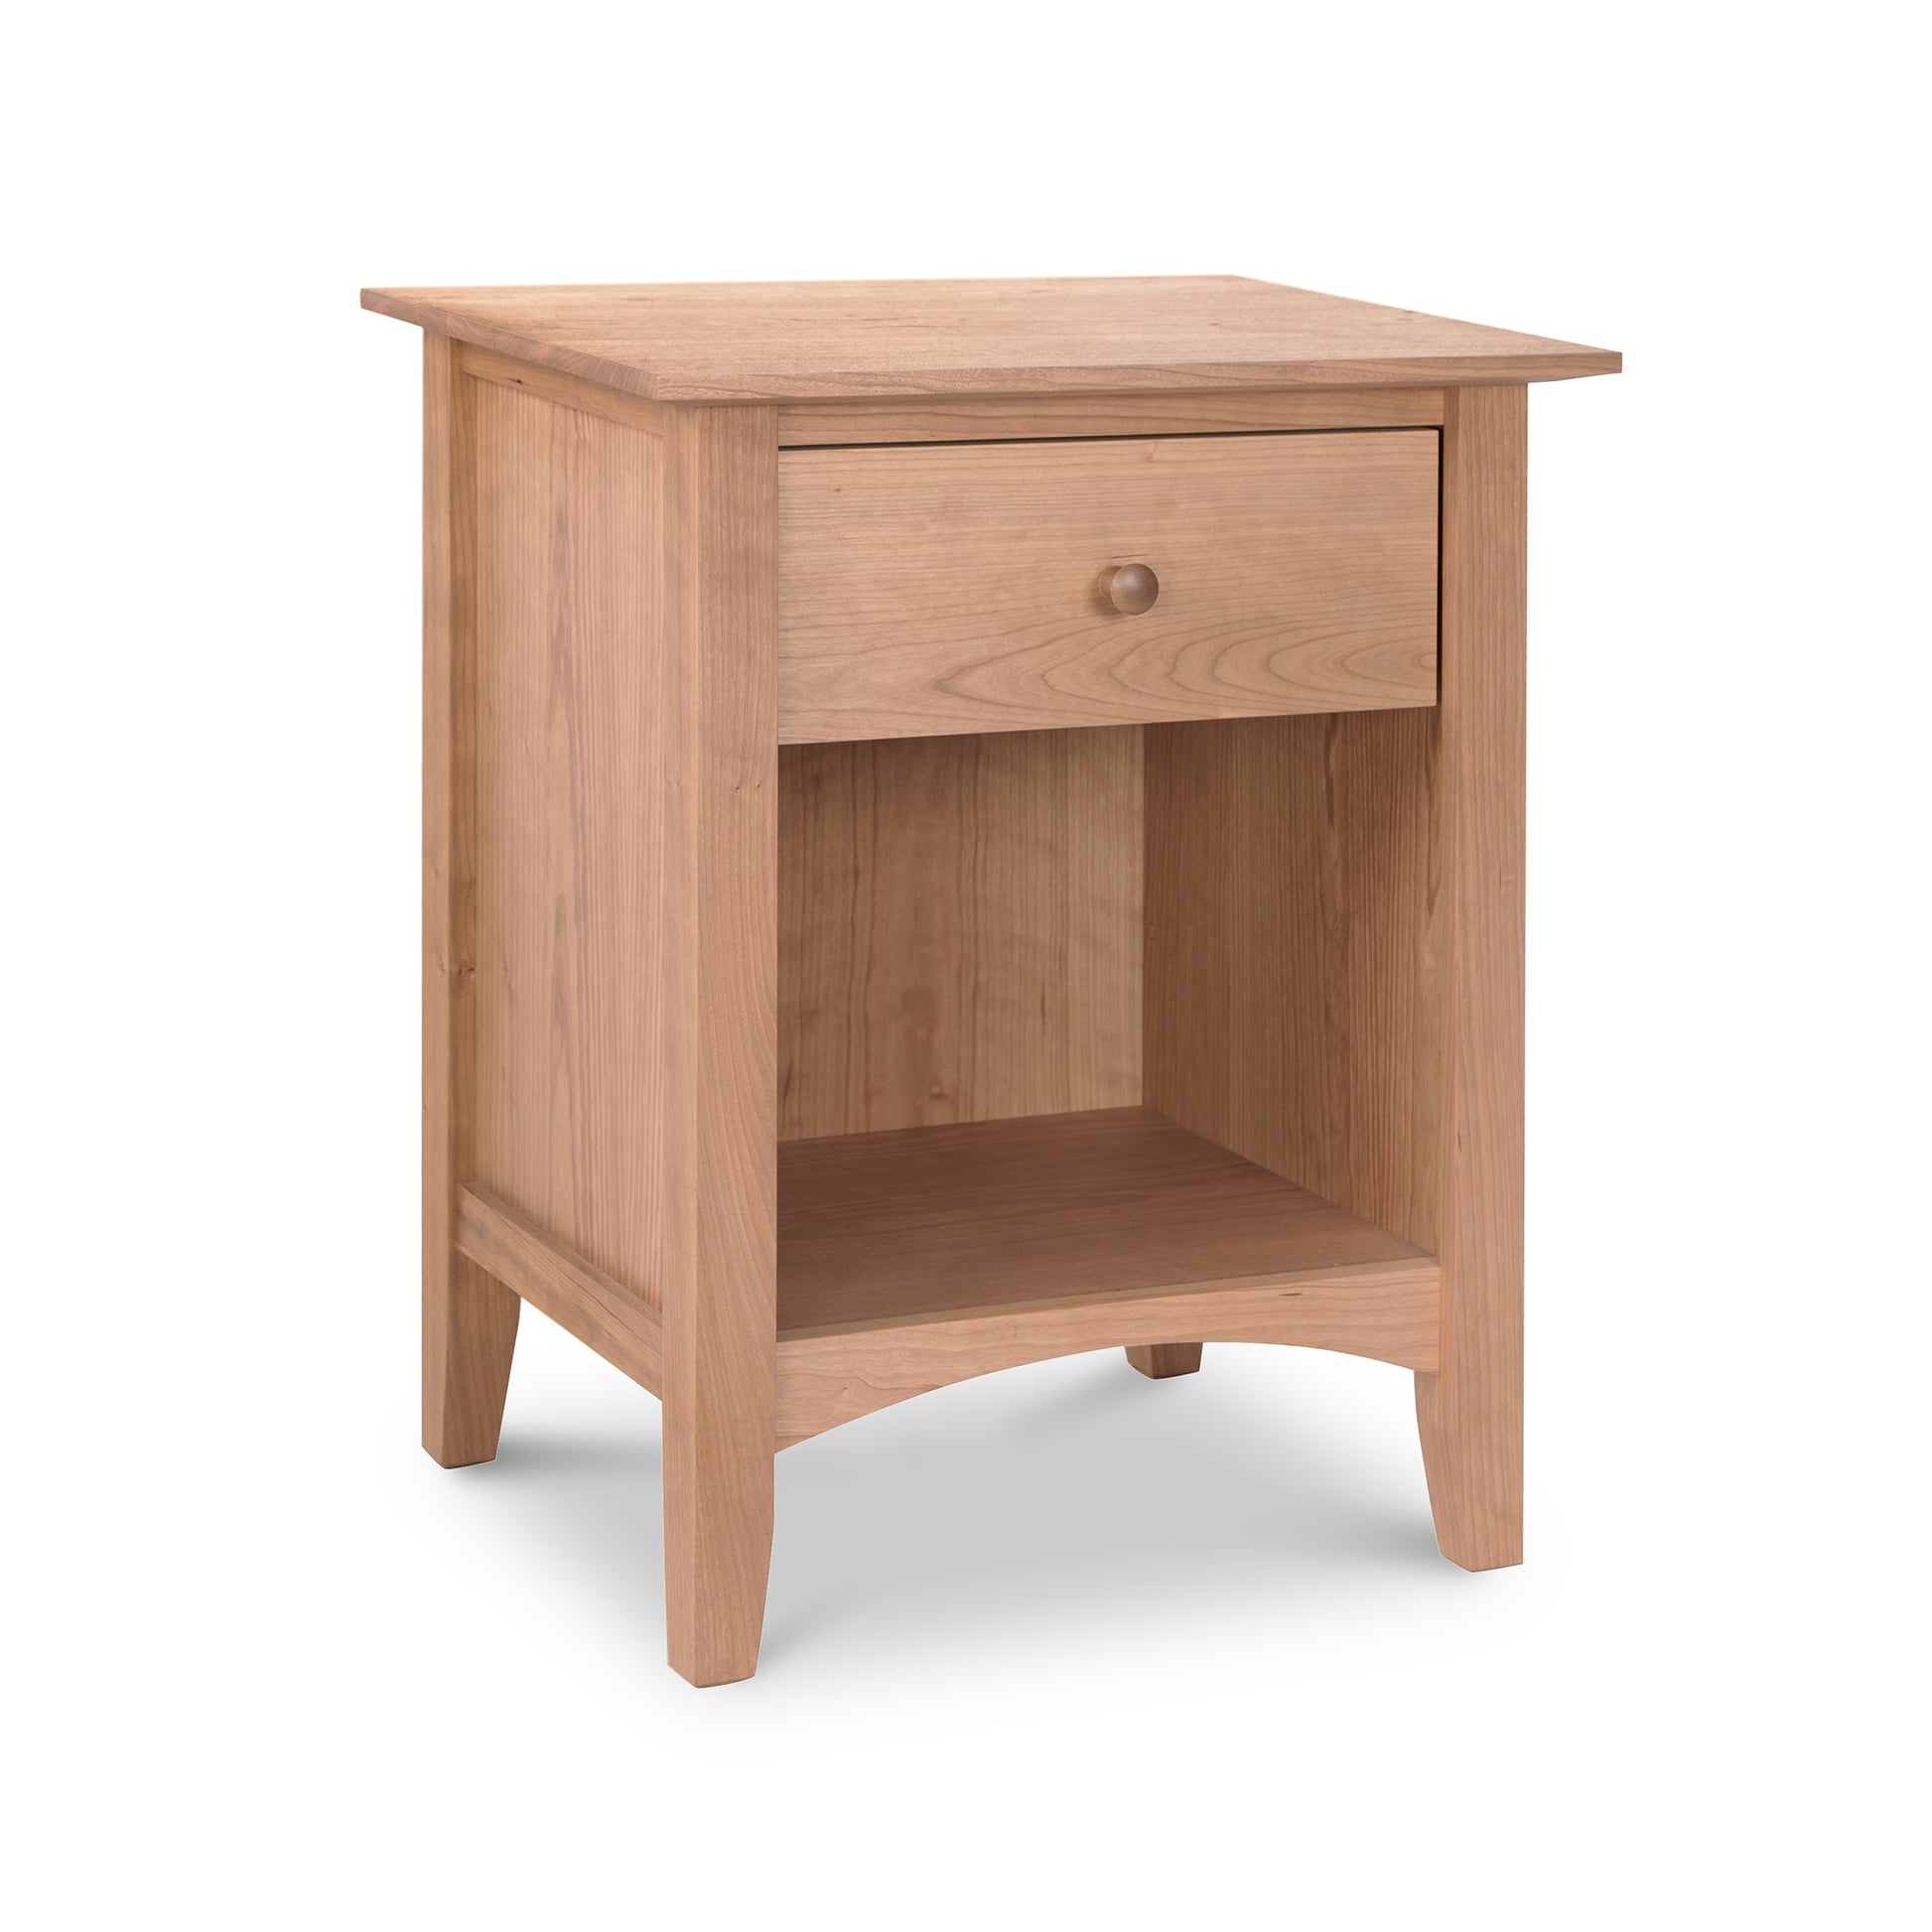 A Maple Corner Woodworks American Shaker 1-Drawer Enclosed Shelf Nightstand with a single drawer and an open lower shelf, isolated on a white background. The furniture, showcasing Vermont craftsmanship, features a simple design with a natural cherry finish.